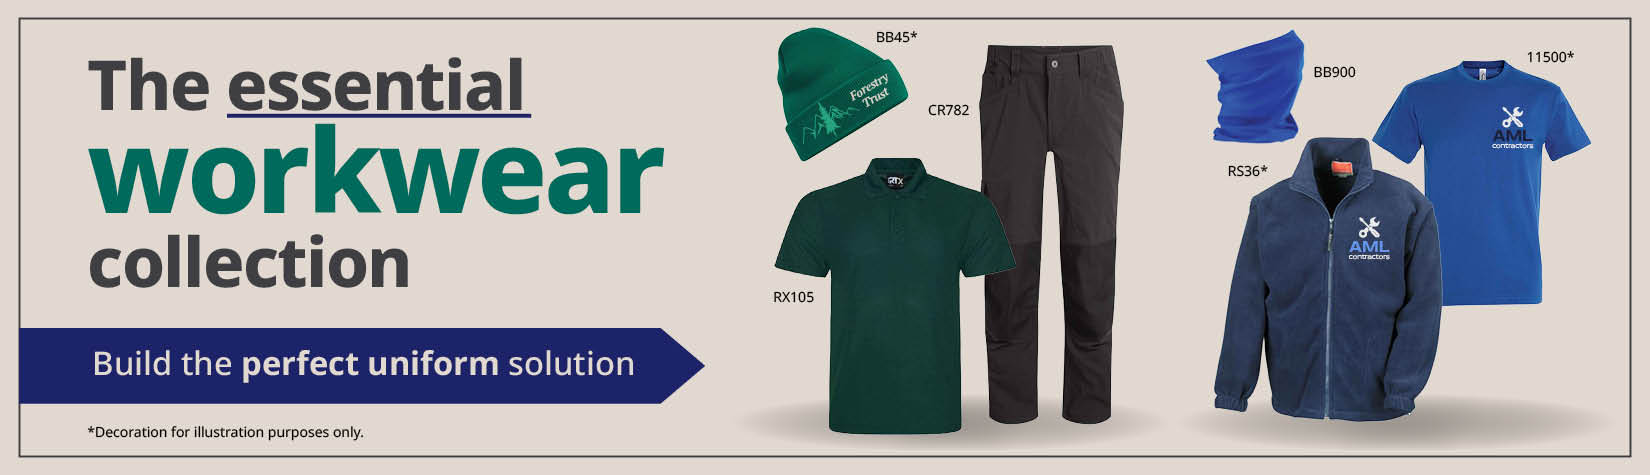 The essential workwear collection 